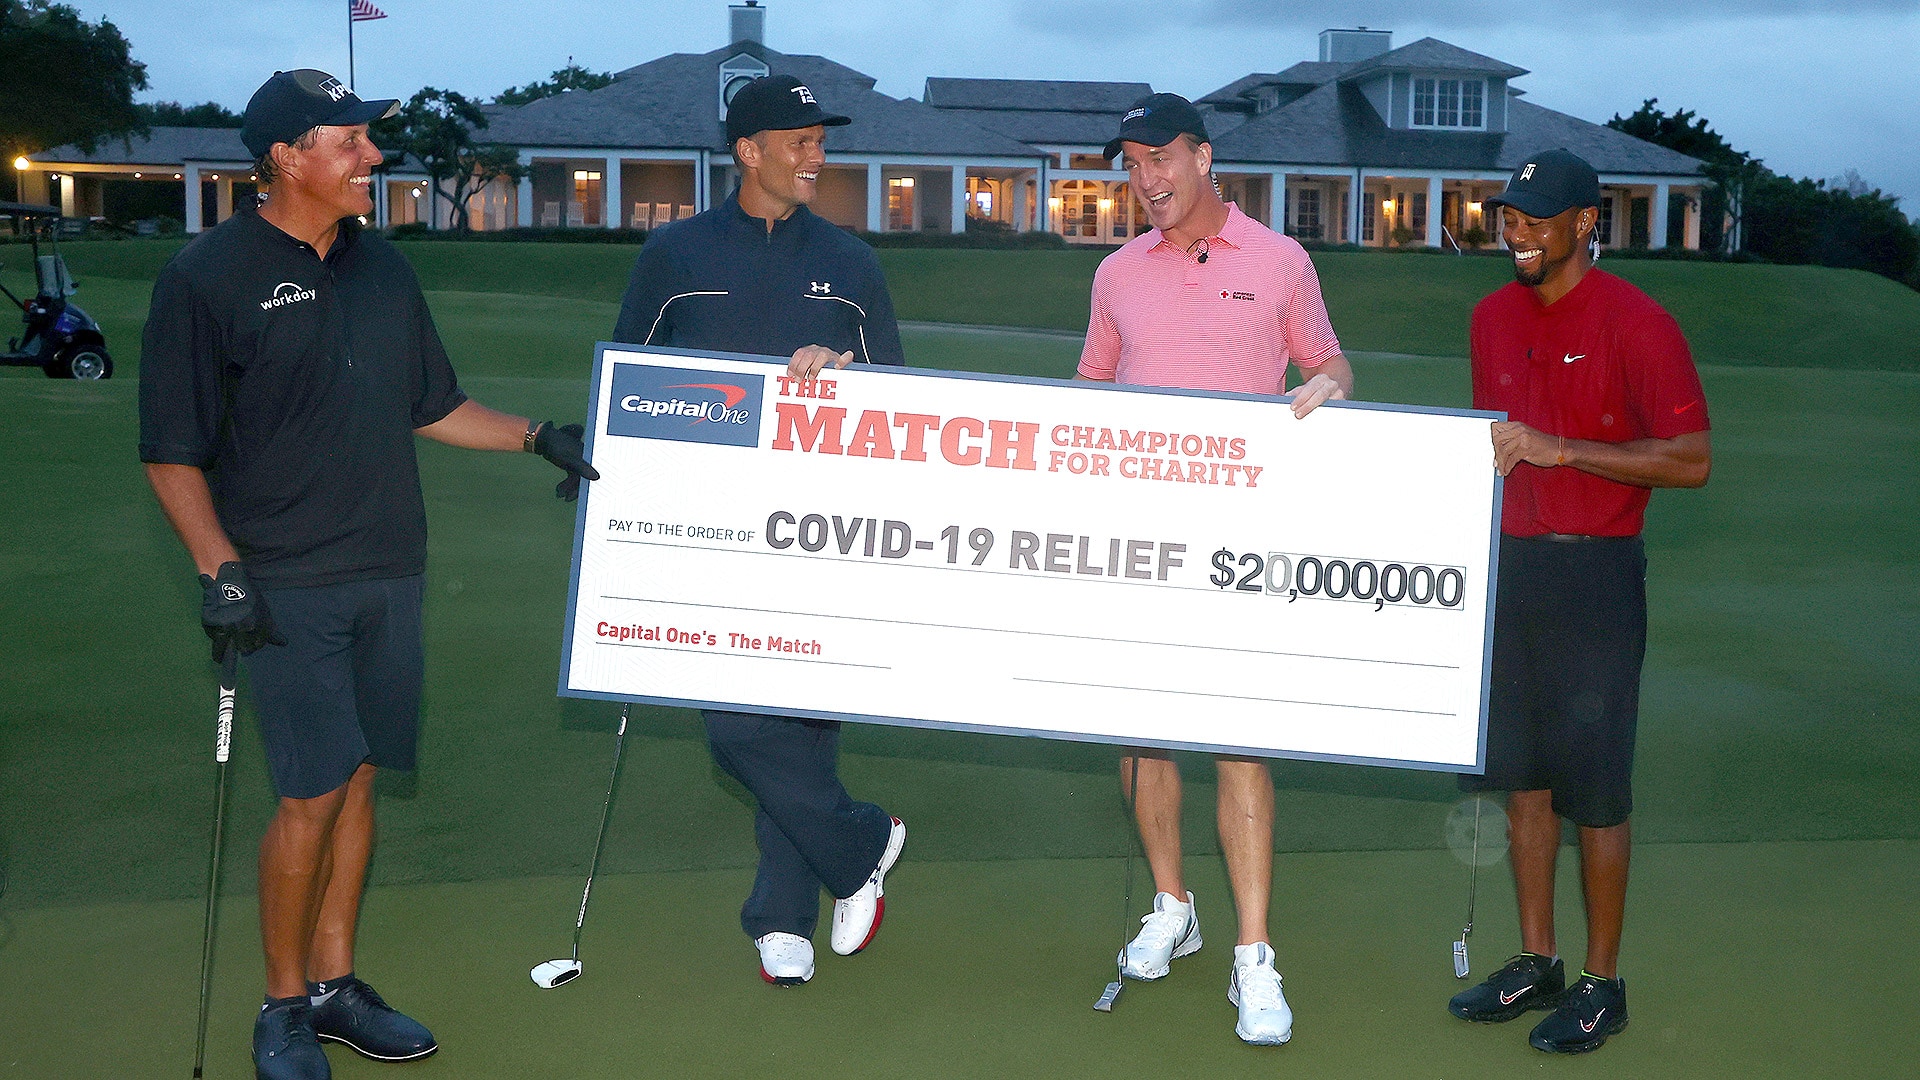 Tiger Woods, Peyton Manning hang on to win Champions for Charity match